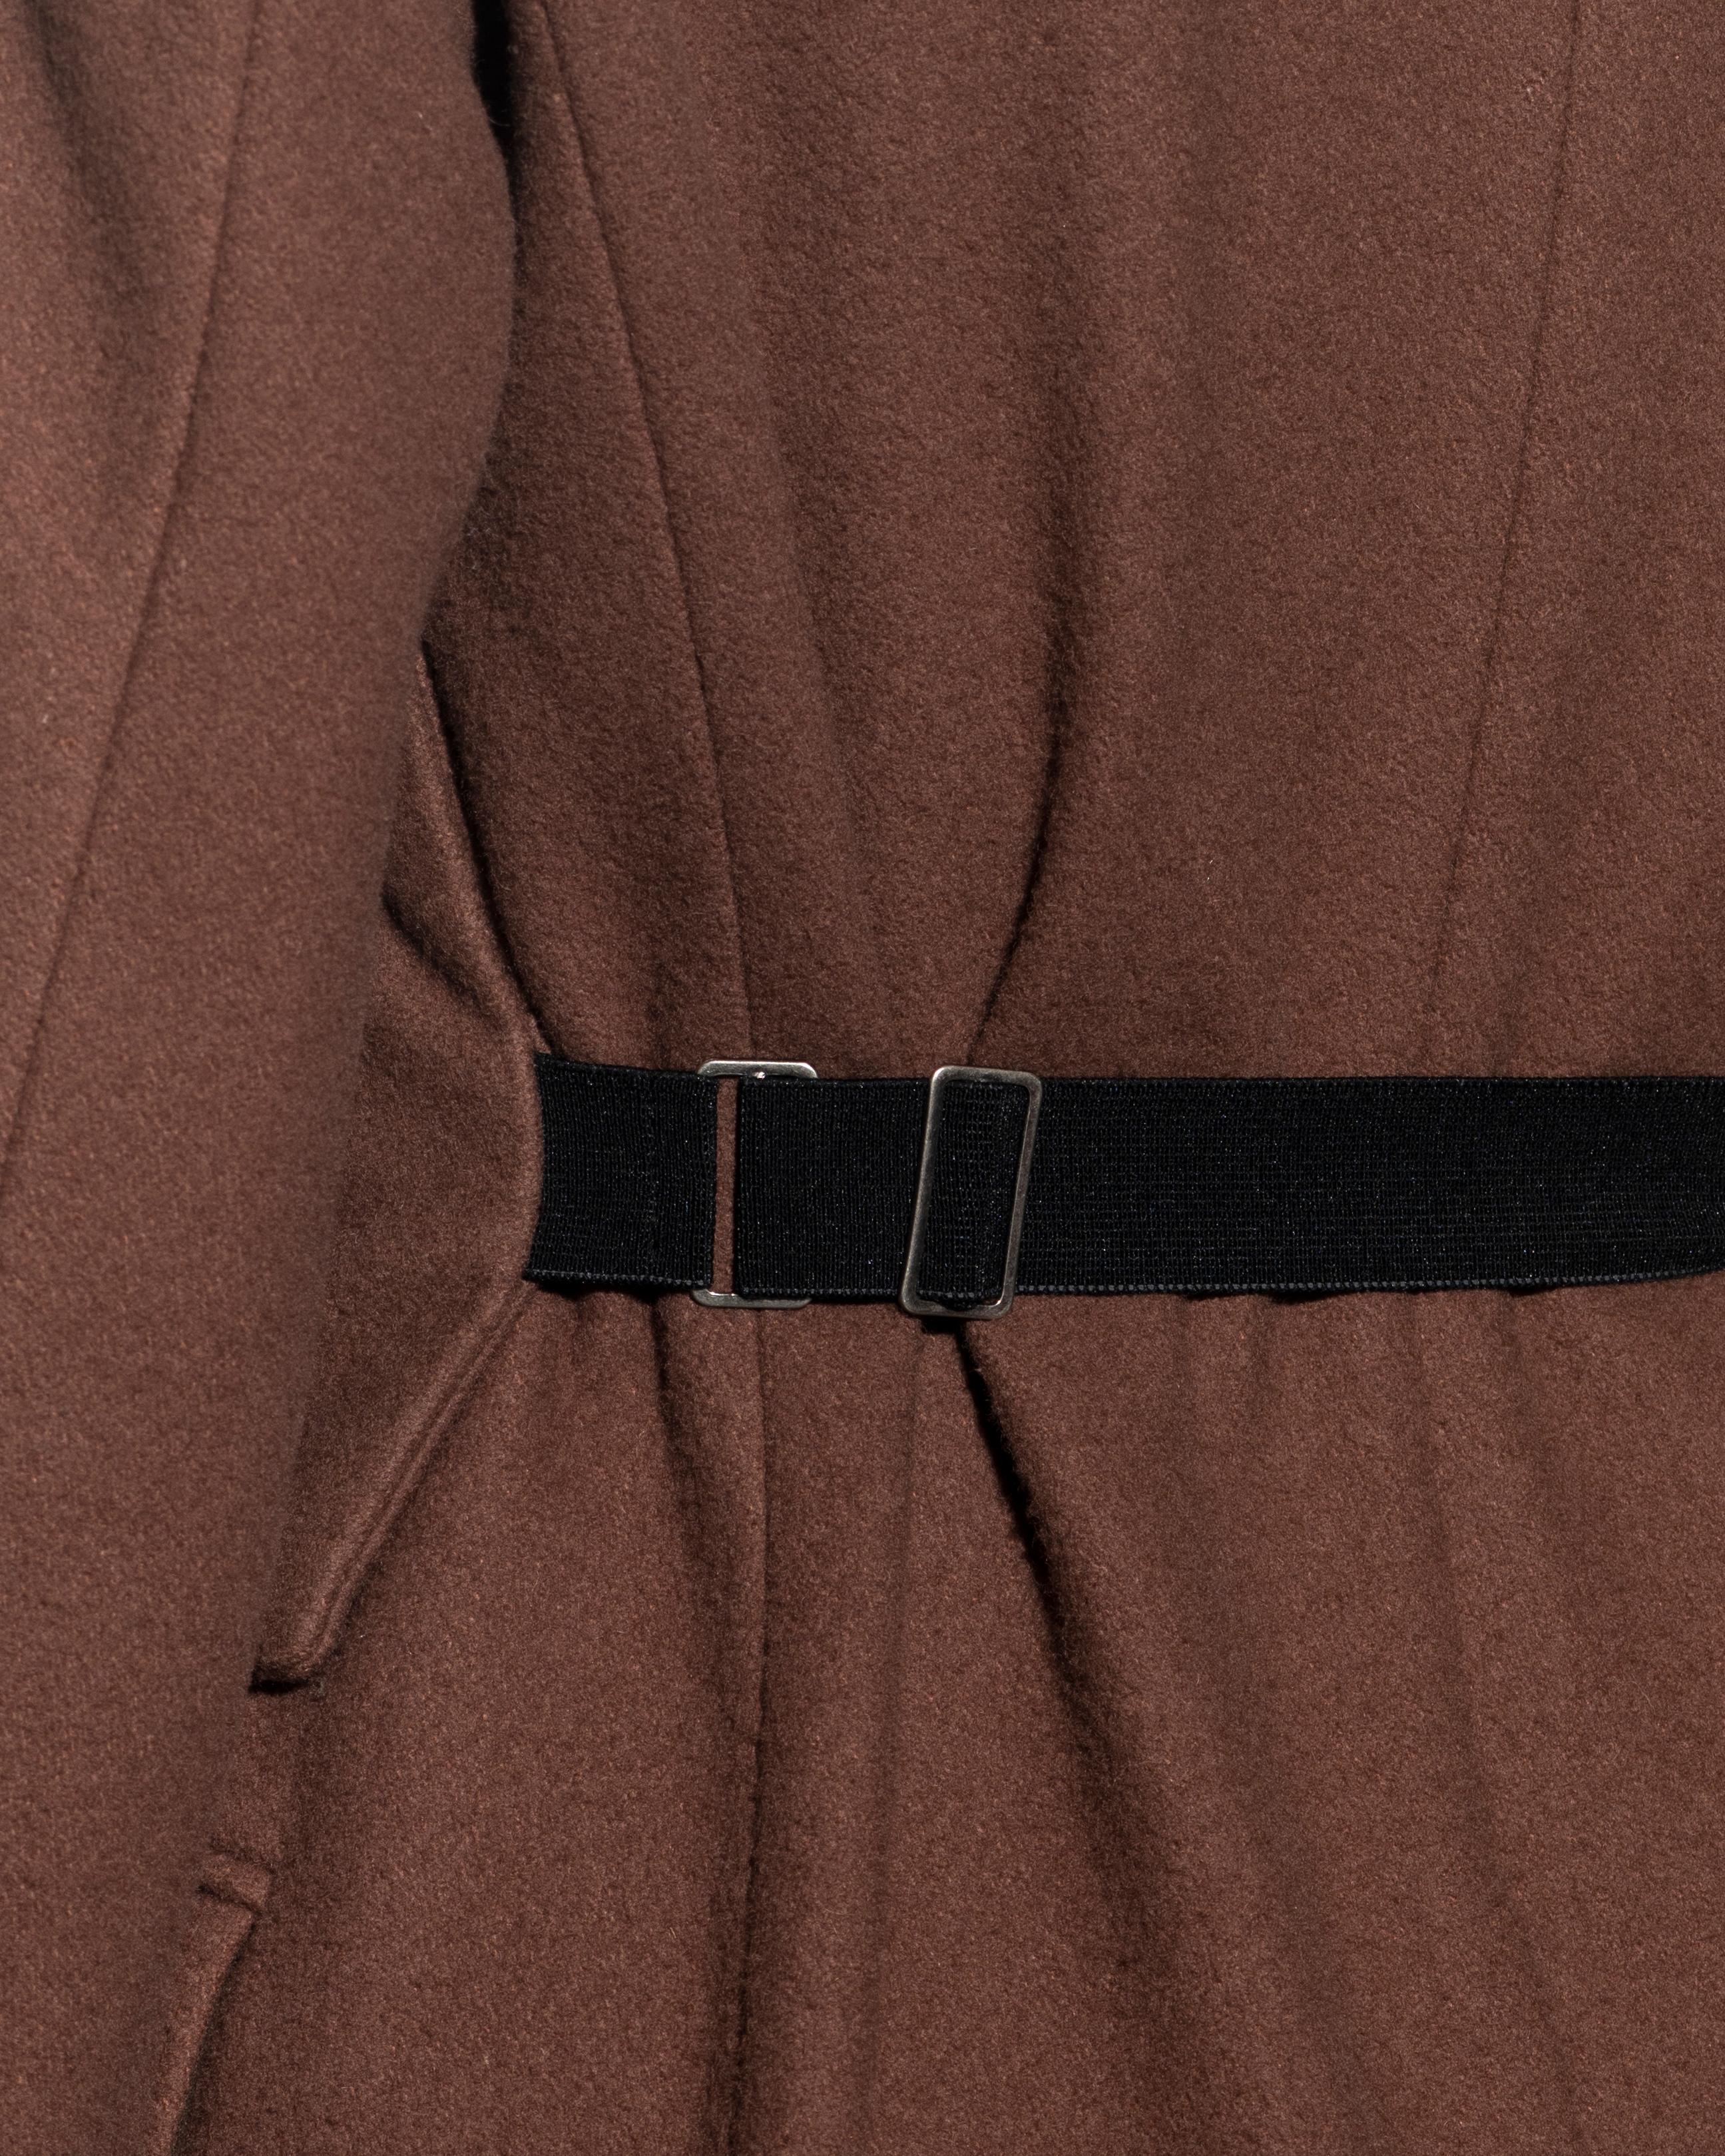 Martin Margiela brown wool coat with matching oversized belt, fw 1996 For Sale 5